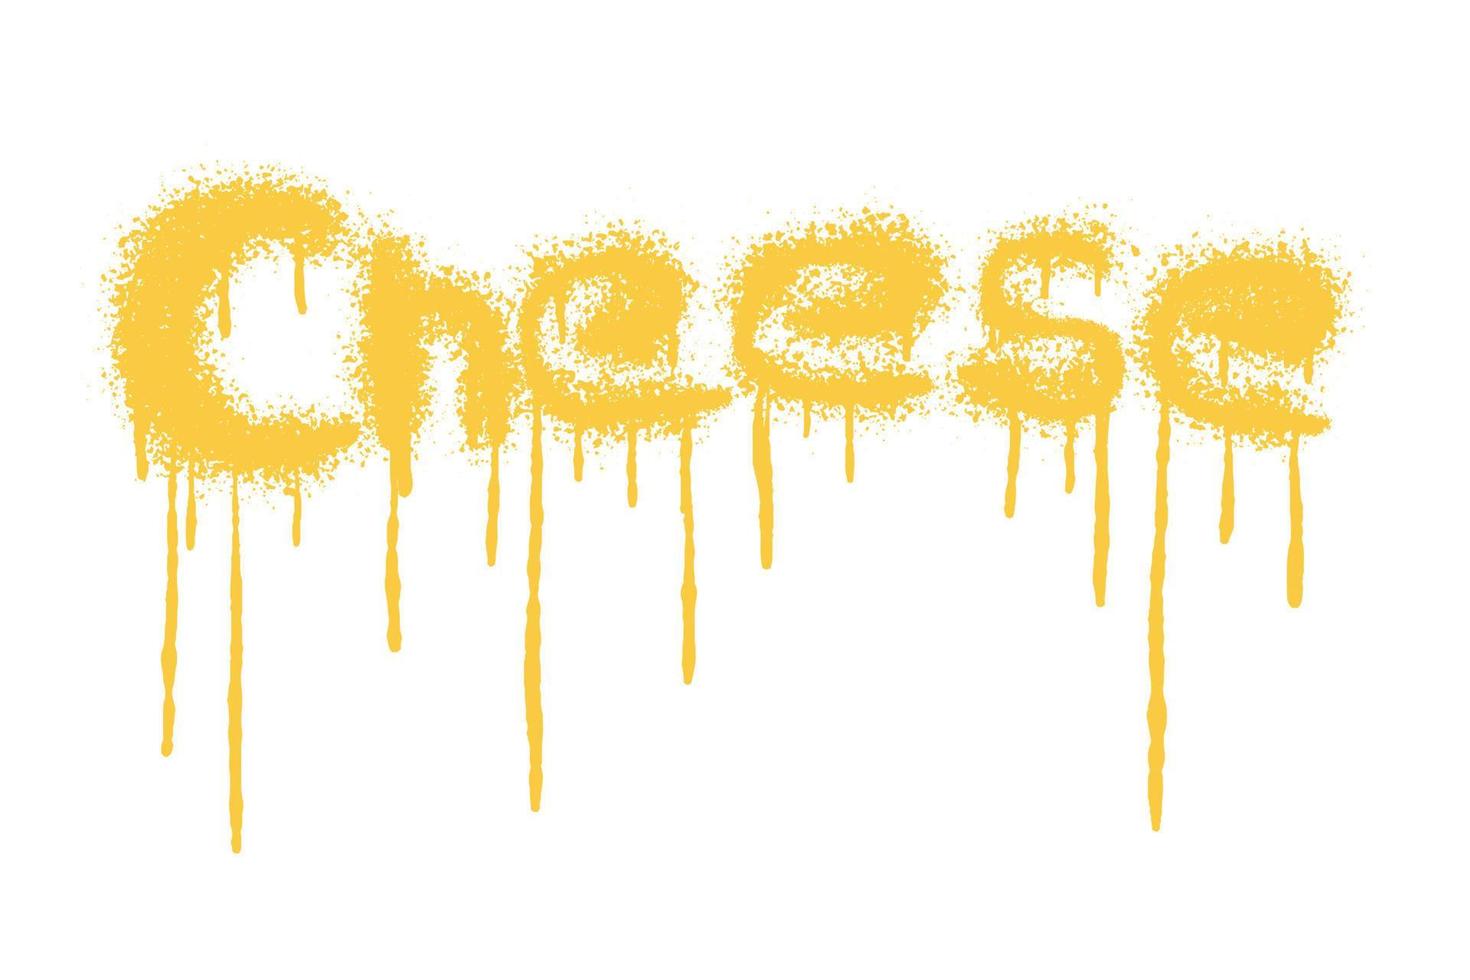 Spray Painted Graffiti Cheese Word Sprayed isolated with a white background. vector